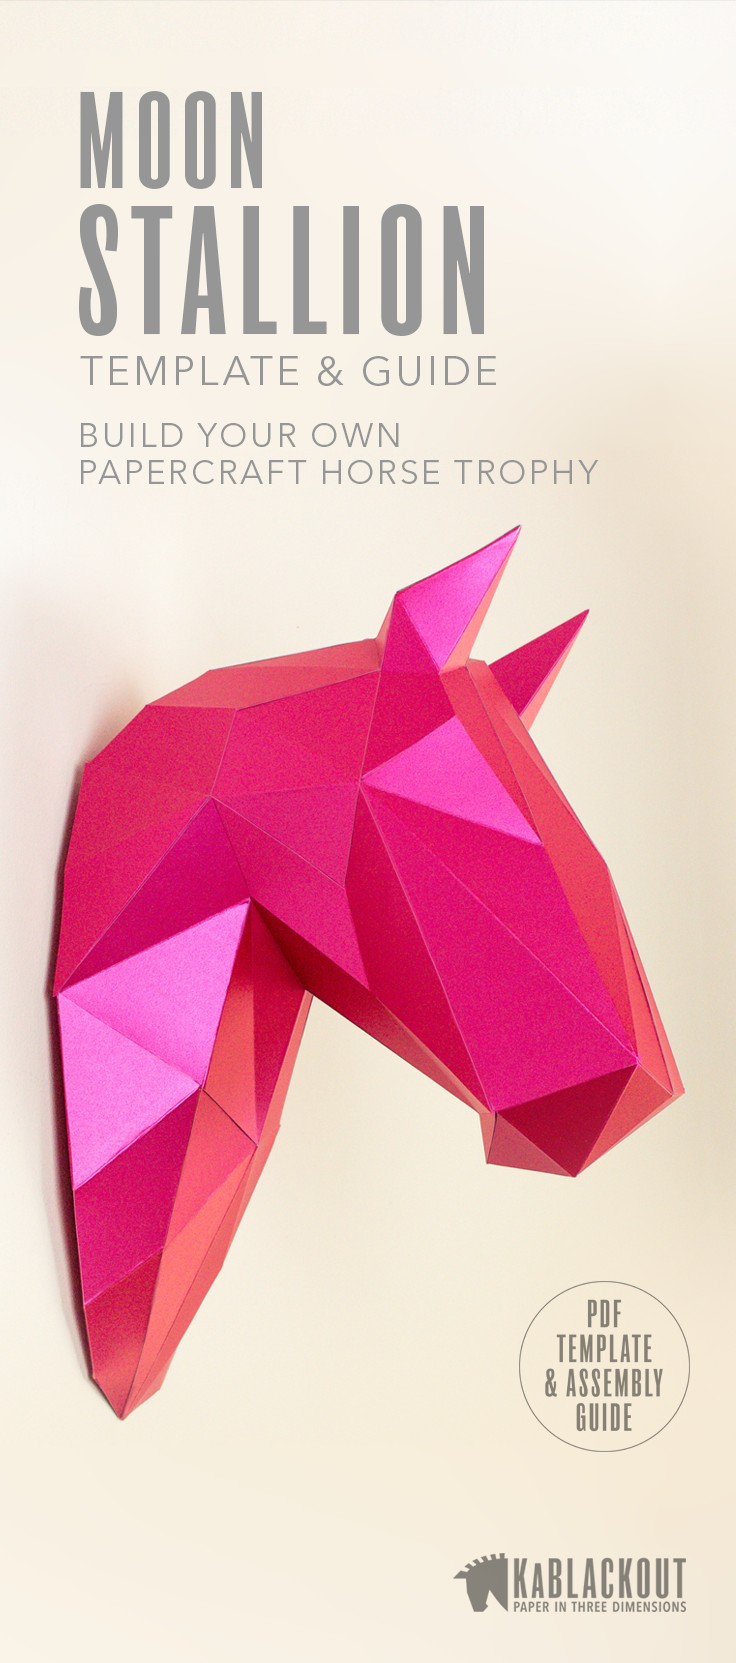 Papercraft Diy Horse Papercraft Diy Horse Template Low Poly Horse 3d Wall Trophy